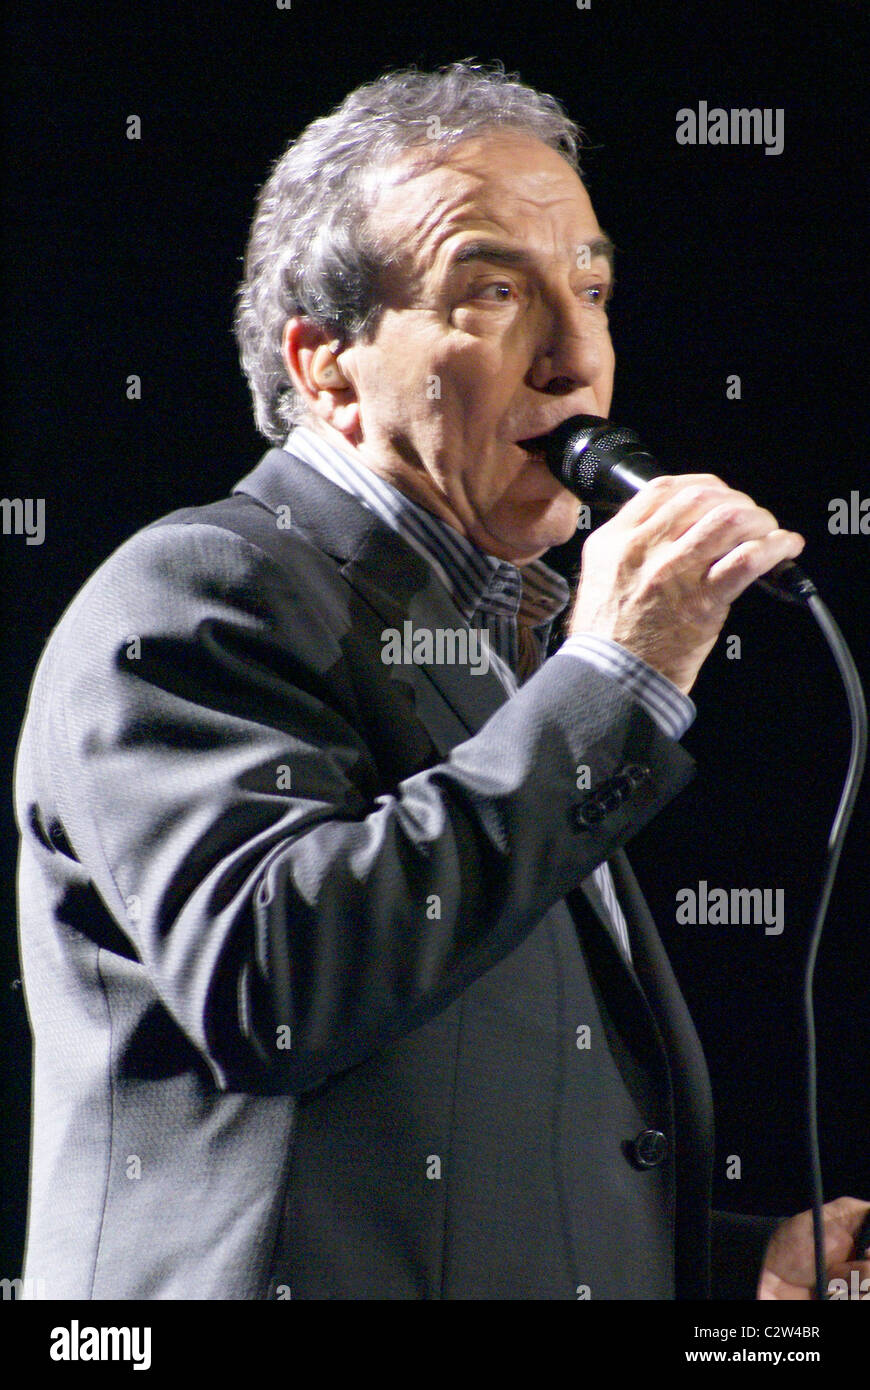 Jose Luis Perales performing live in concert at the Gran Rex Theatre Buenos Aires, Argentina - 11.07.08 Stock Photo